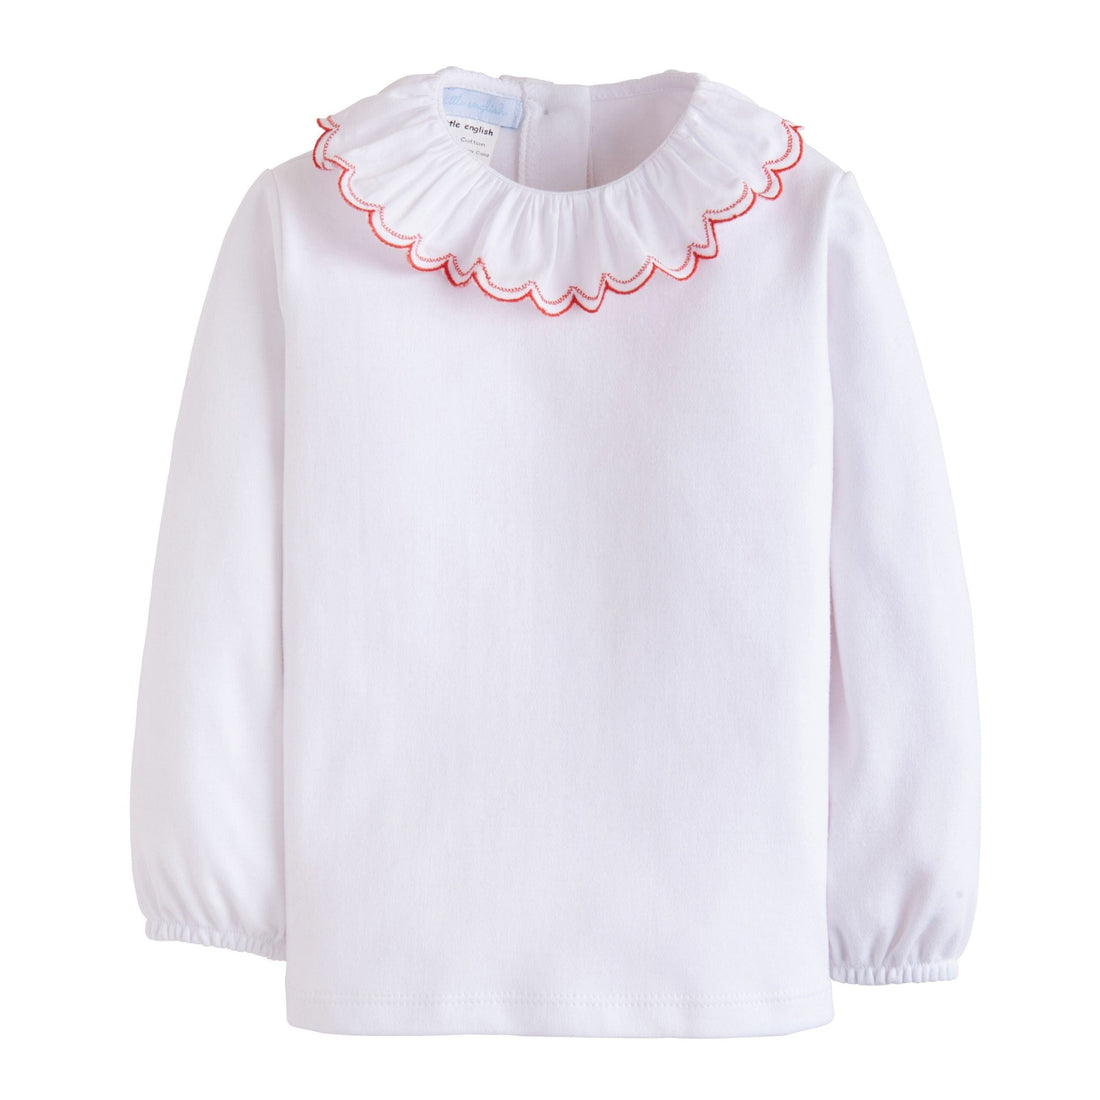 little english classic childrens clothing girls white long sleeve blouse with ruffled white and red collar